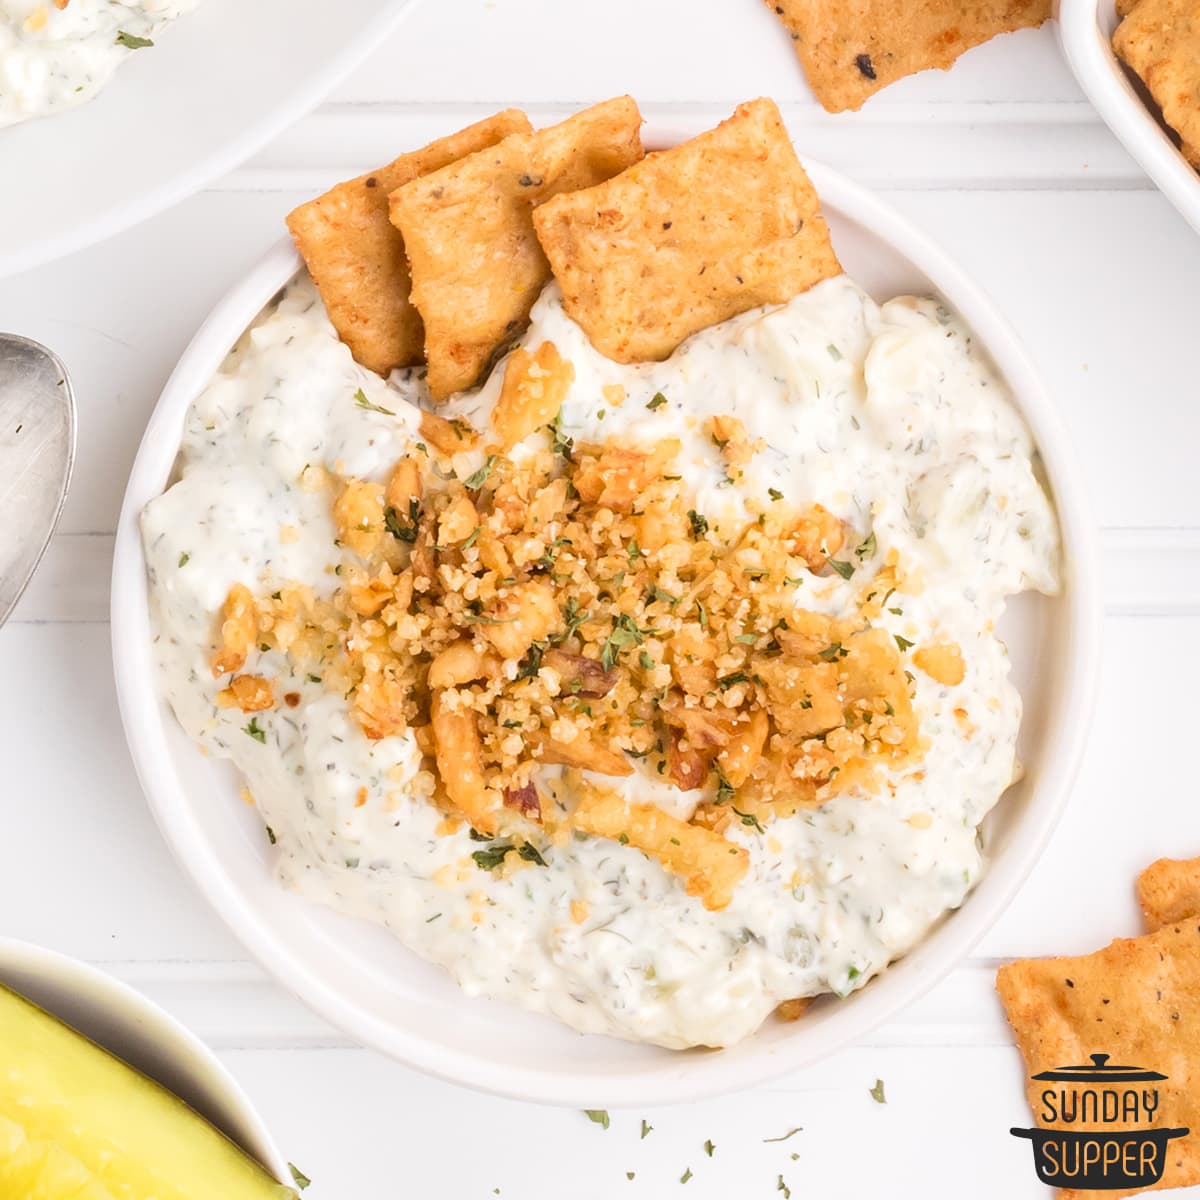 dill pickle dip topped with fried onions and breadcrumbs in a bowl with crackers